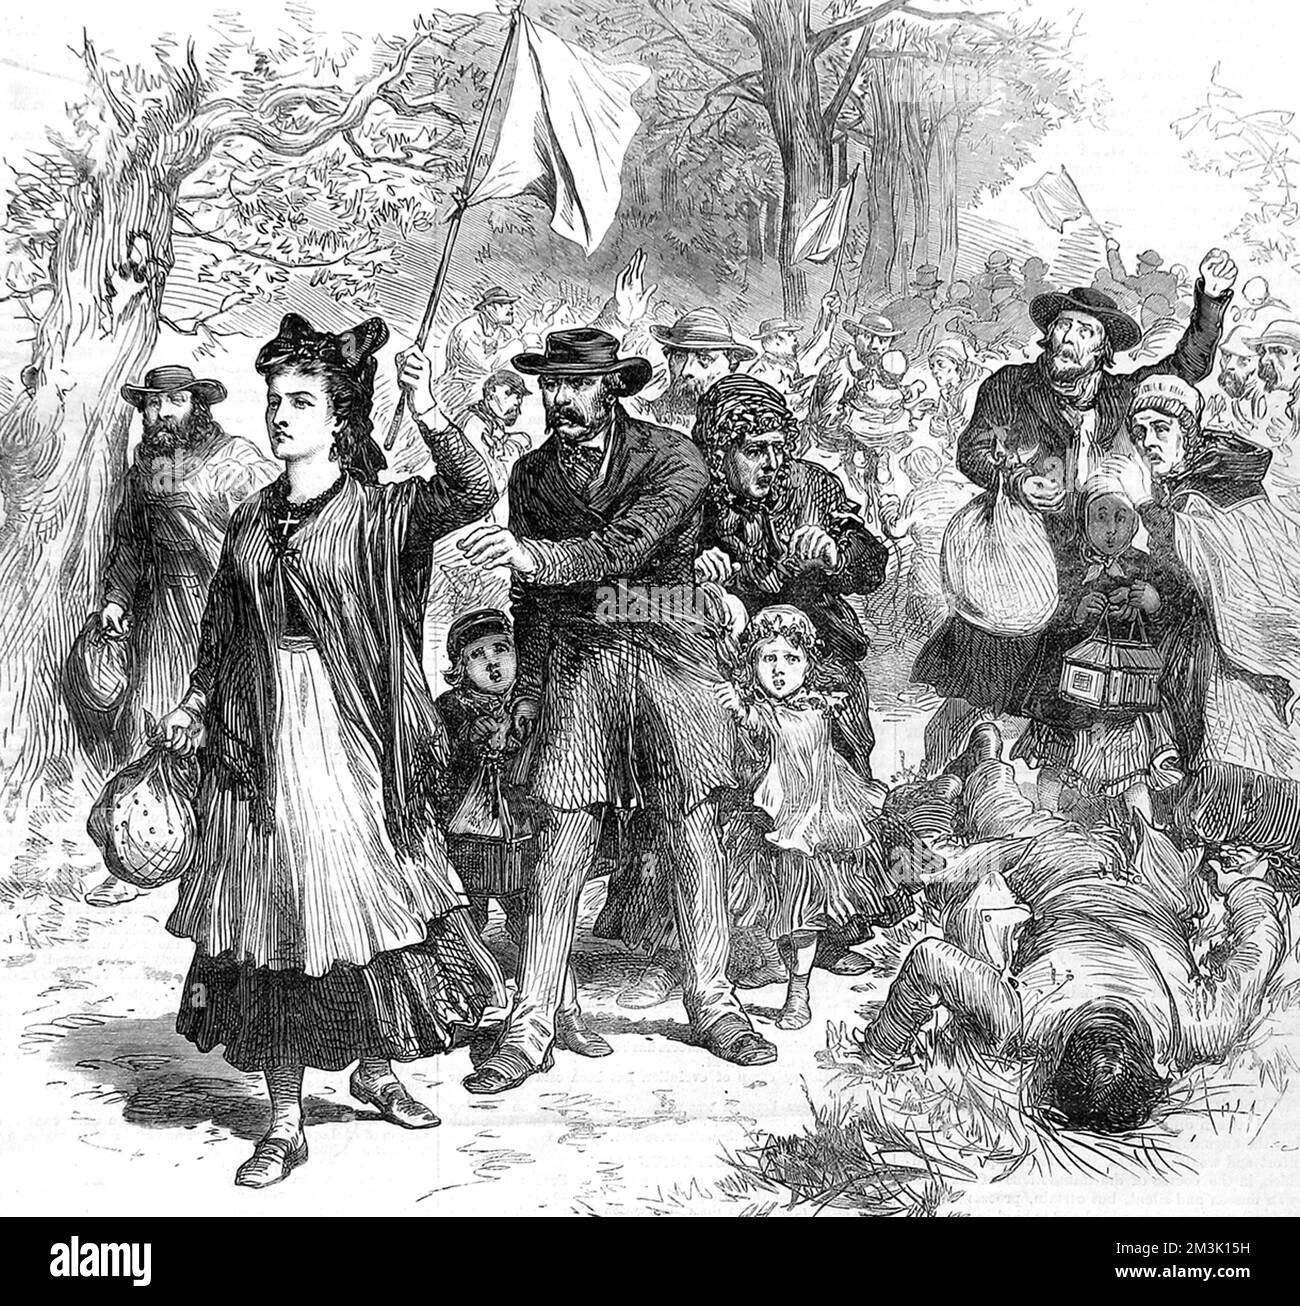 Families rushing to escape Metz, at the front of the crowd is a traditionally dressed woman, in head dress and dirndl skirt, holding a white flag. An injured or dead man is lying at the side of the road still holding his travelling bag. The French surrendered on October 27th 1870 at Metz, following the Battle of Sedan.     Date: 1870 Stock Photo